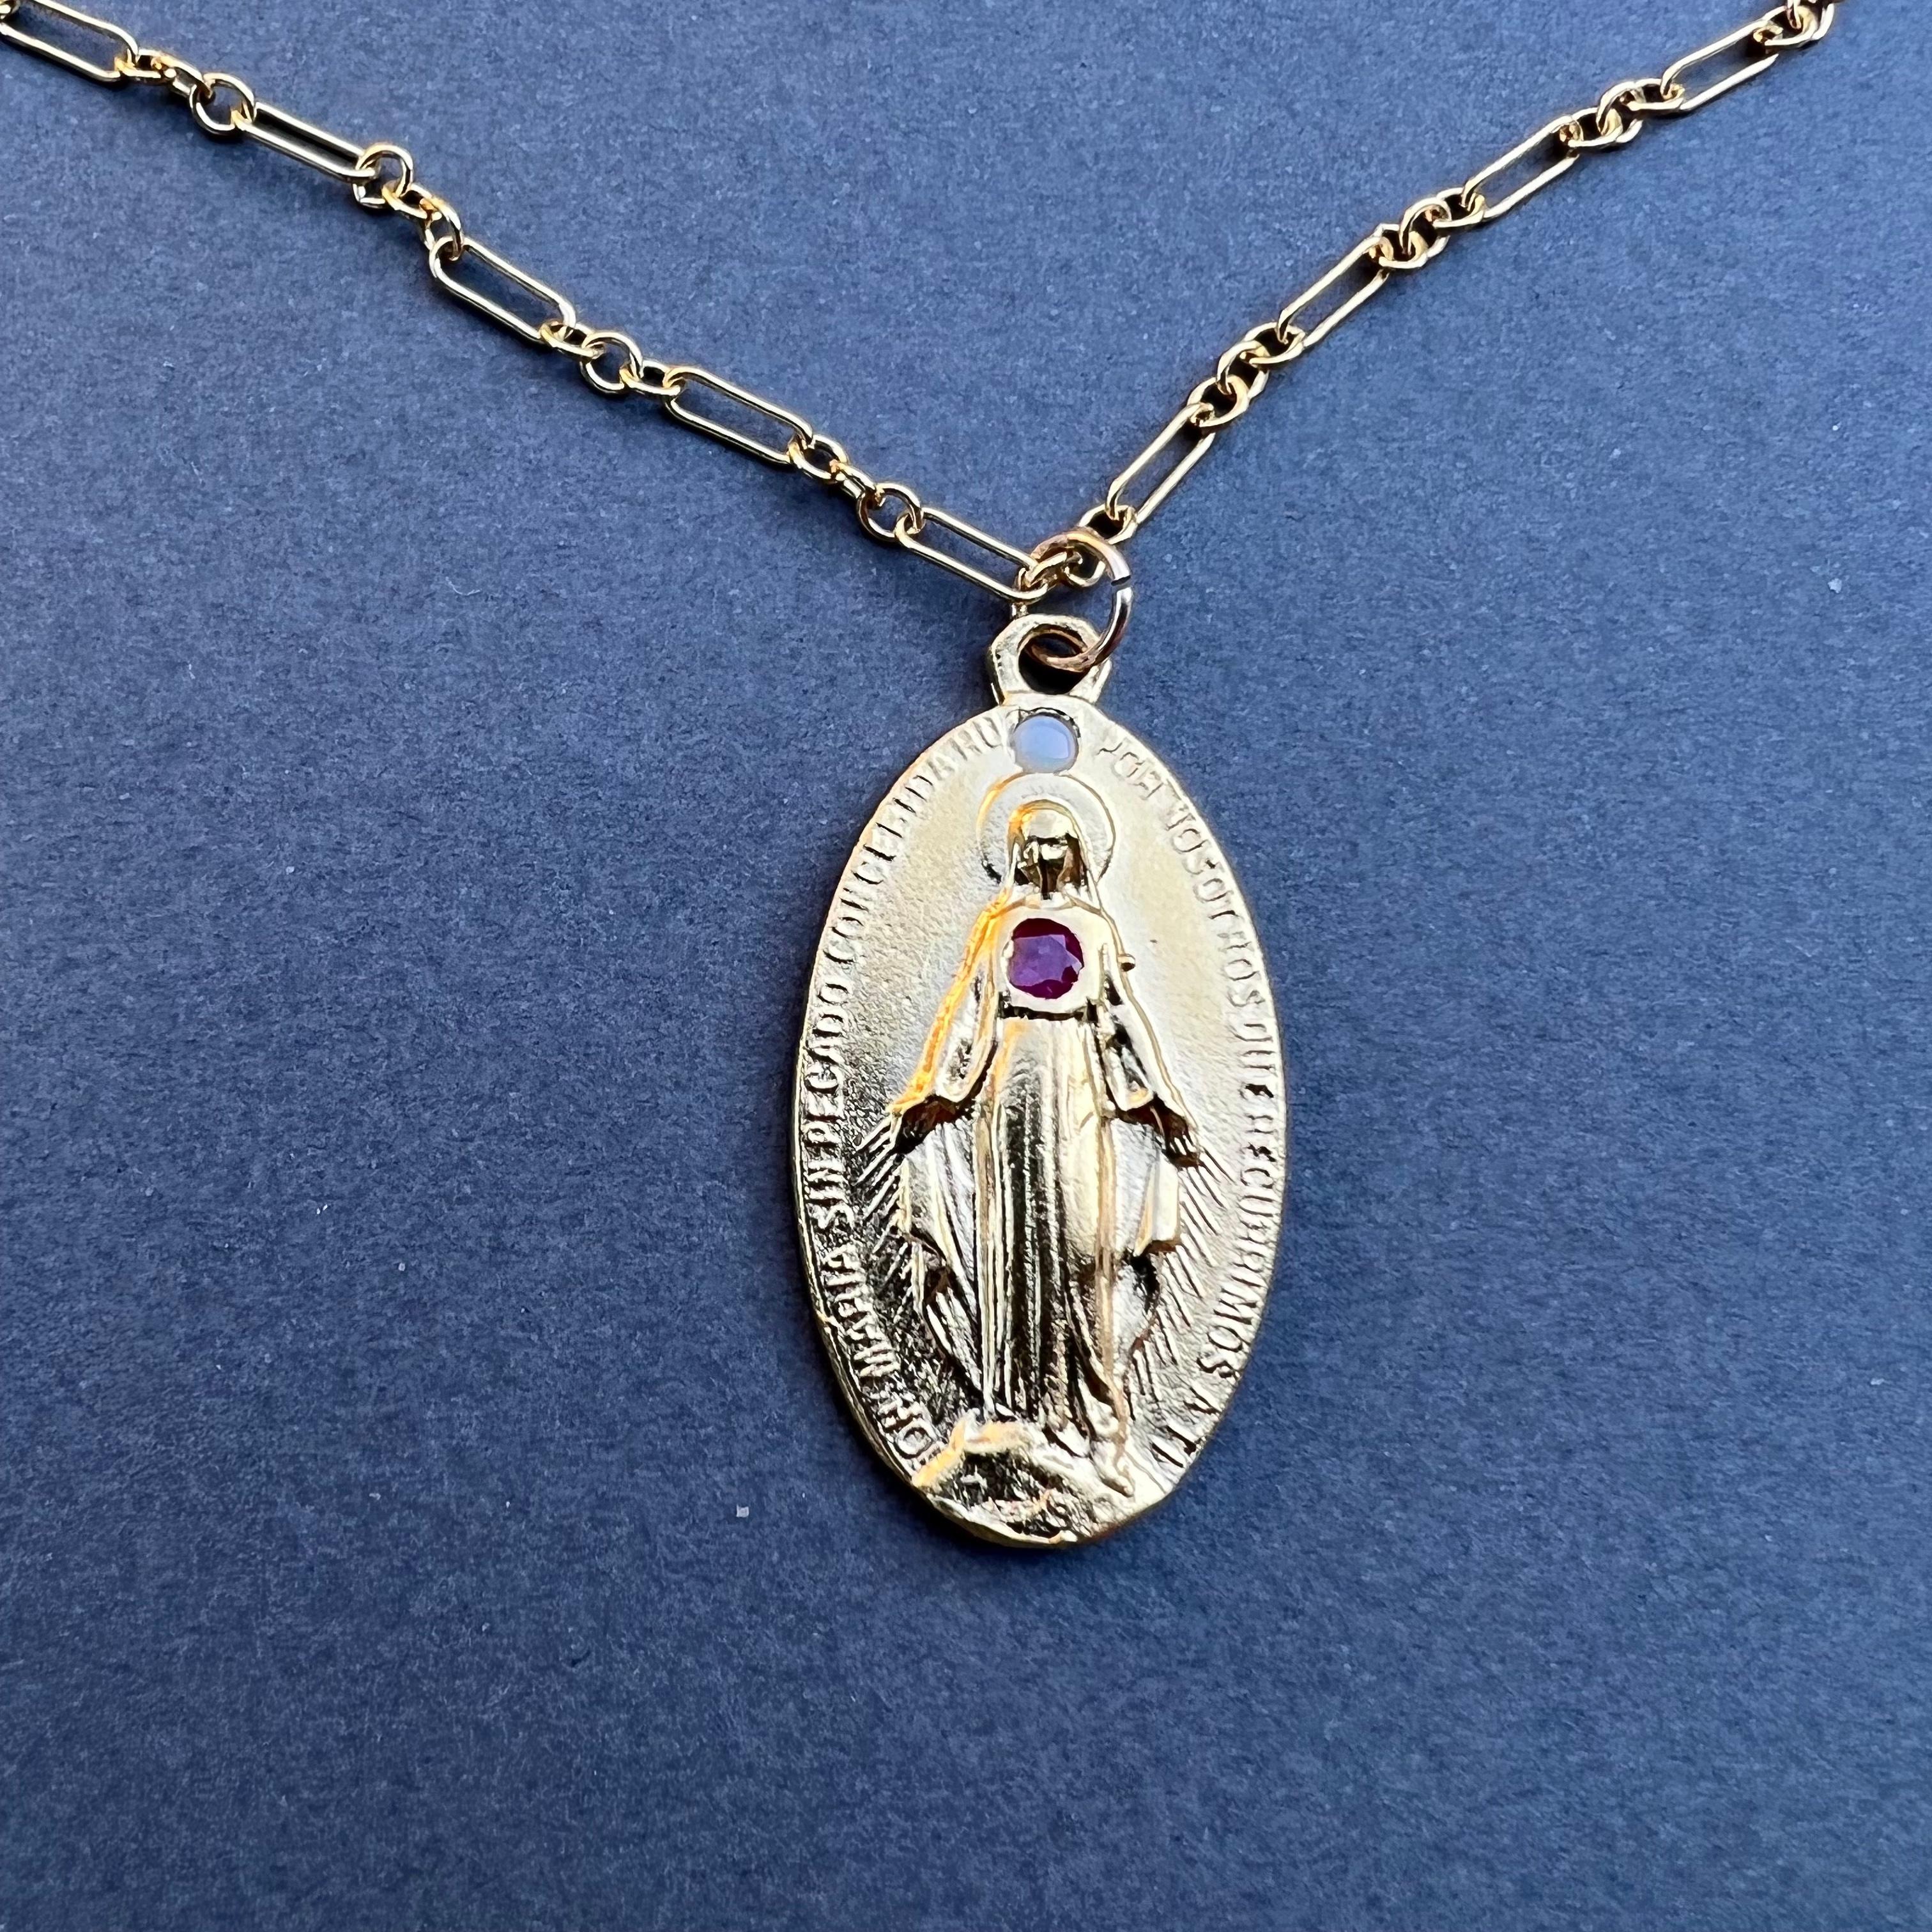 Virgin Mary Ruby Opal Medal Chain Necklace J Dauphin For Sale 2